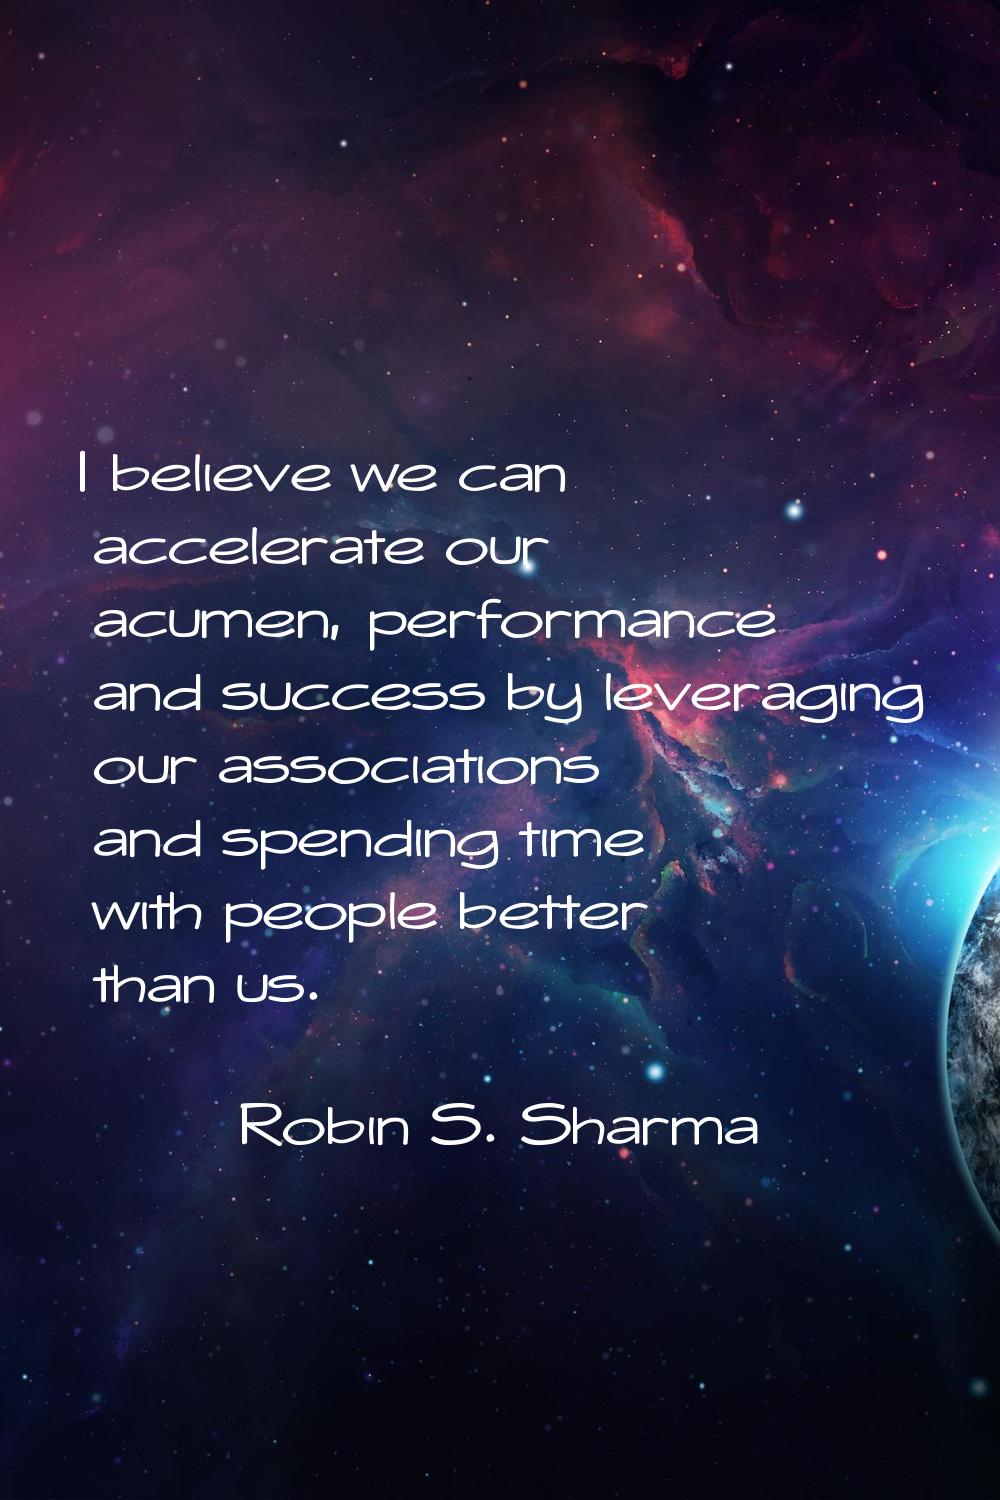 I believe we can accelerate our acumen, performance and success by leveraging our associations and 